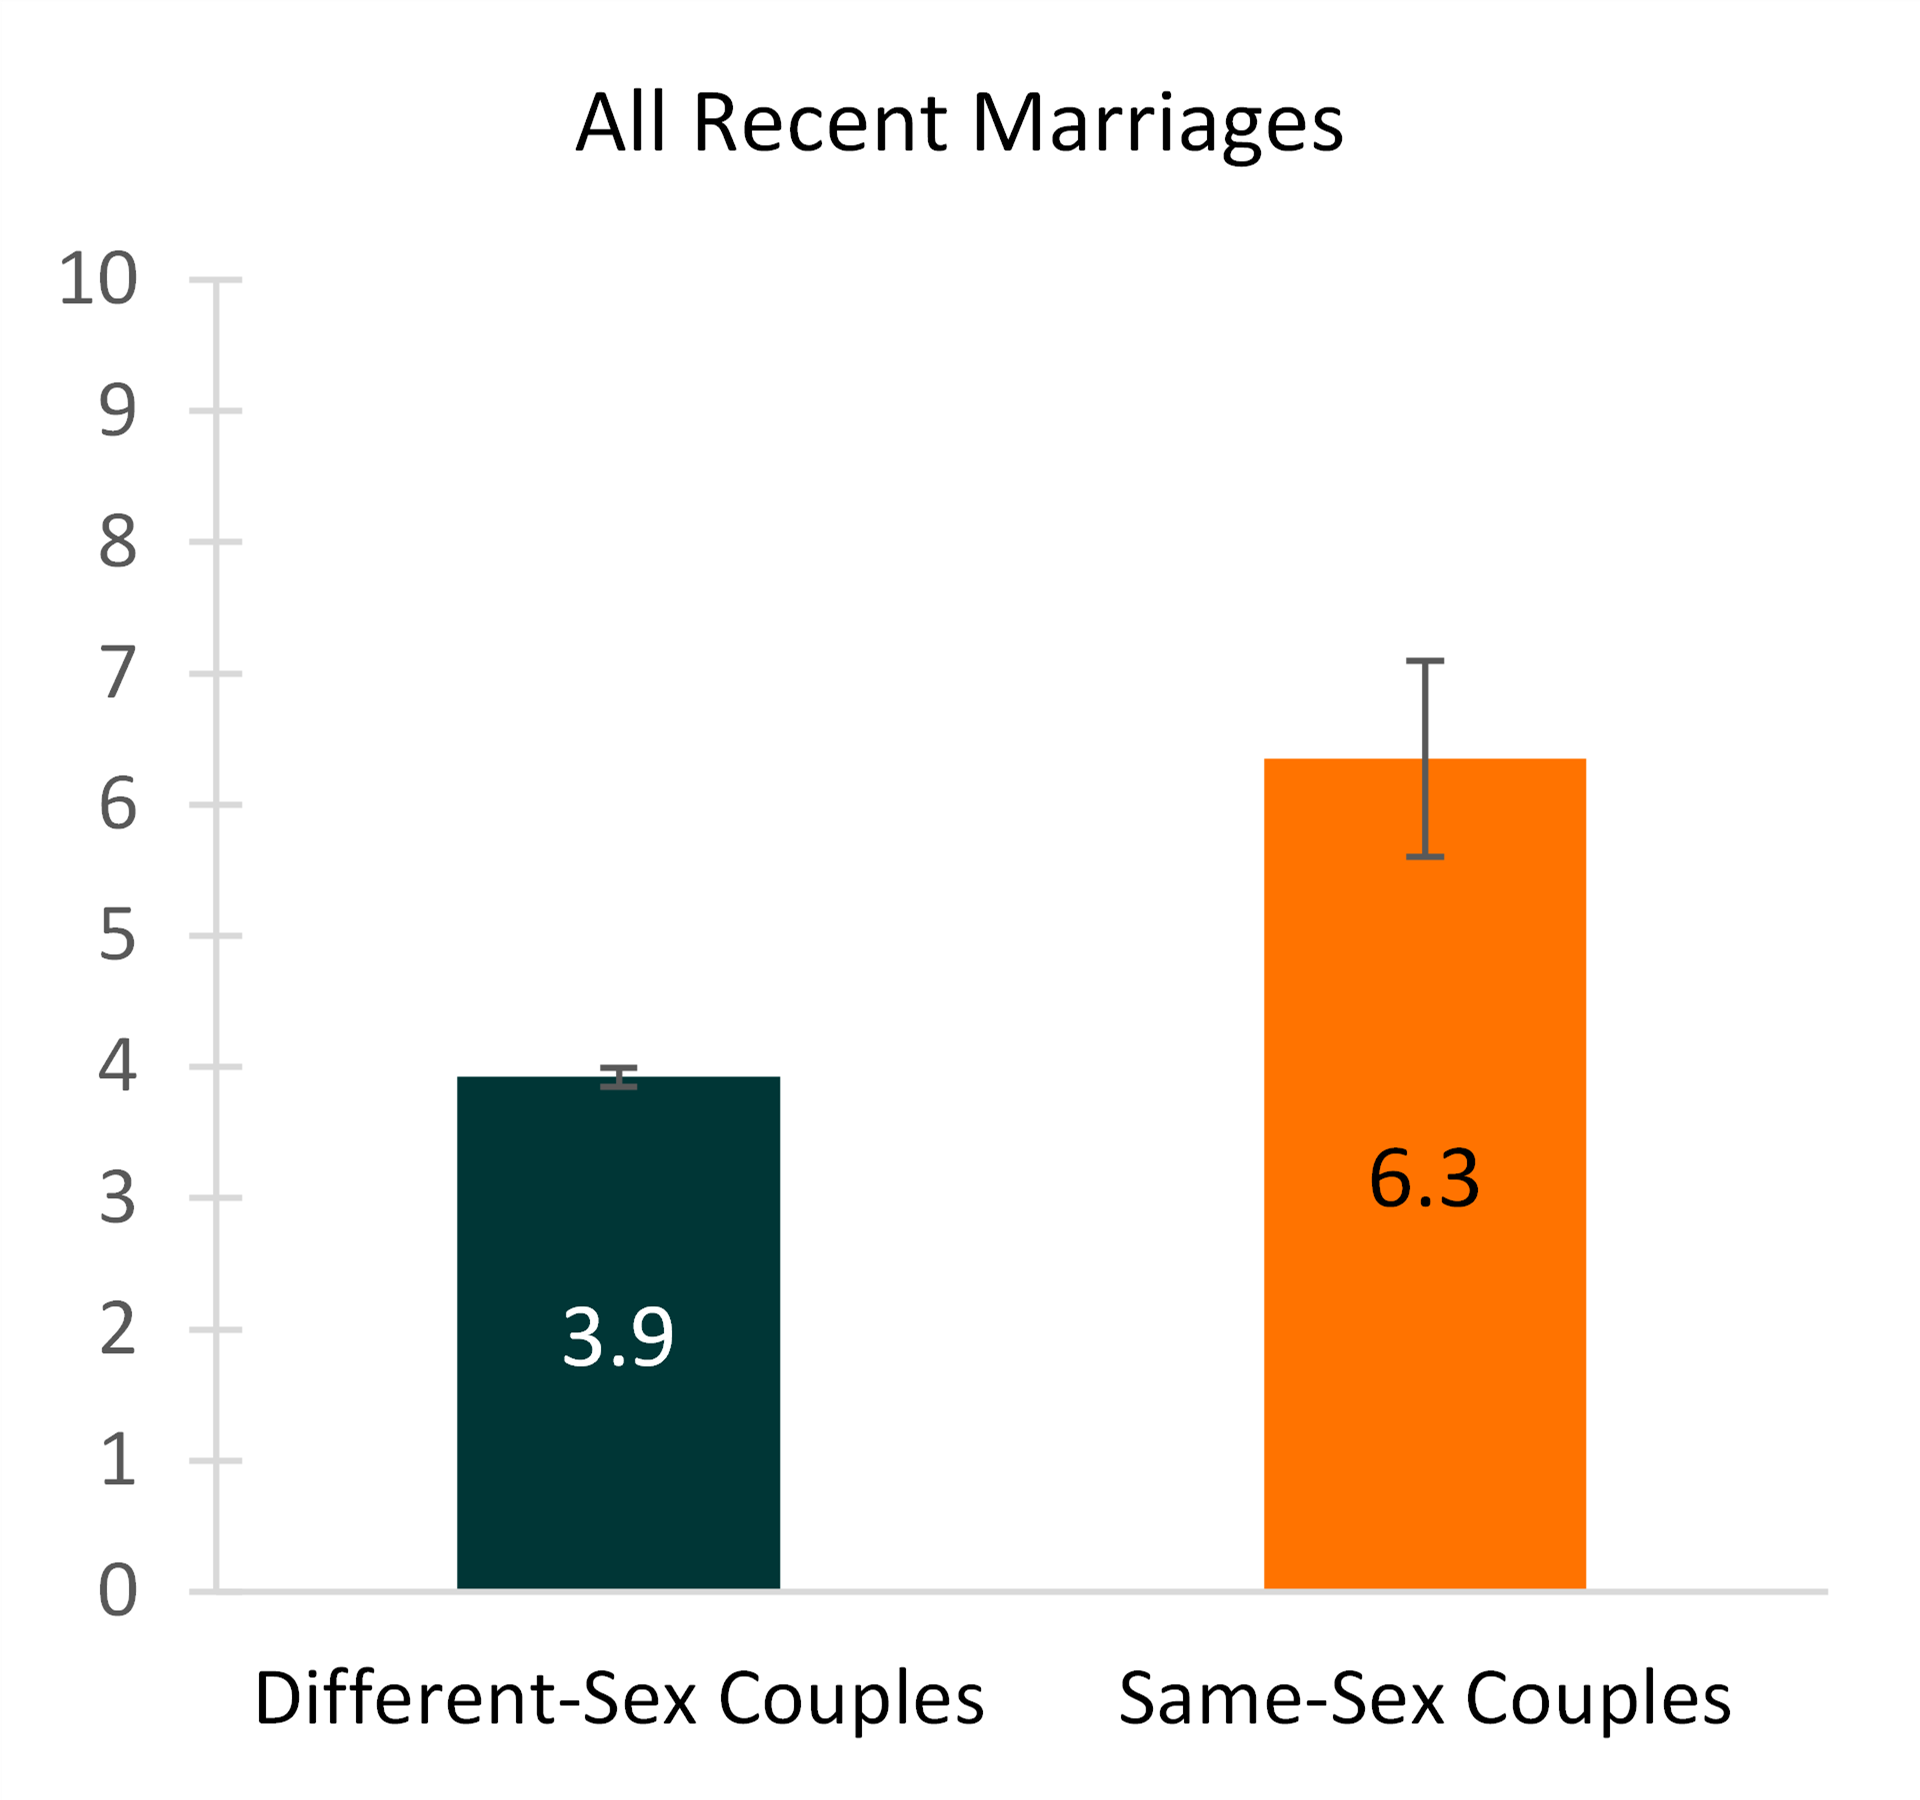 Figure 4. Mean Age Difference & Marital History for Same-Sex and Different-Sex Couples Married in the Last Year, 2019-all recent marriages